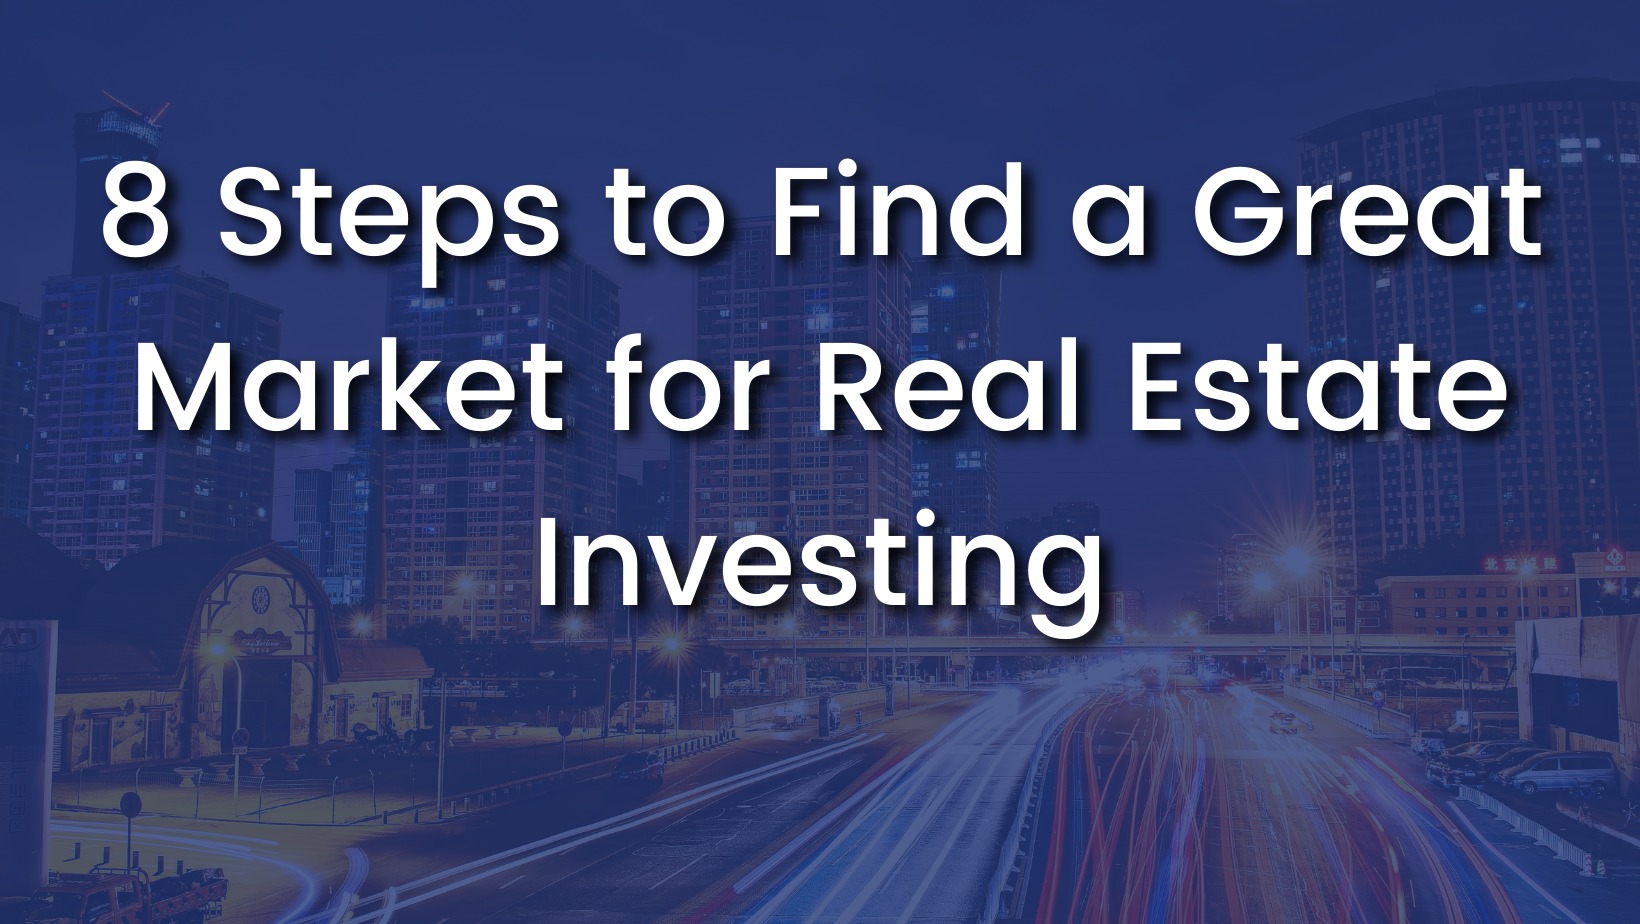 8 Steps to Find a Great Market for Real Estate Investing